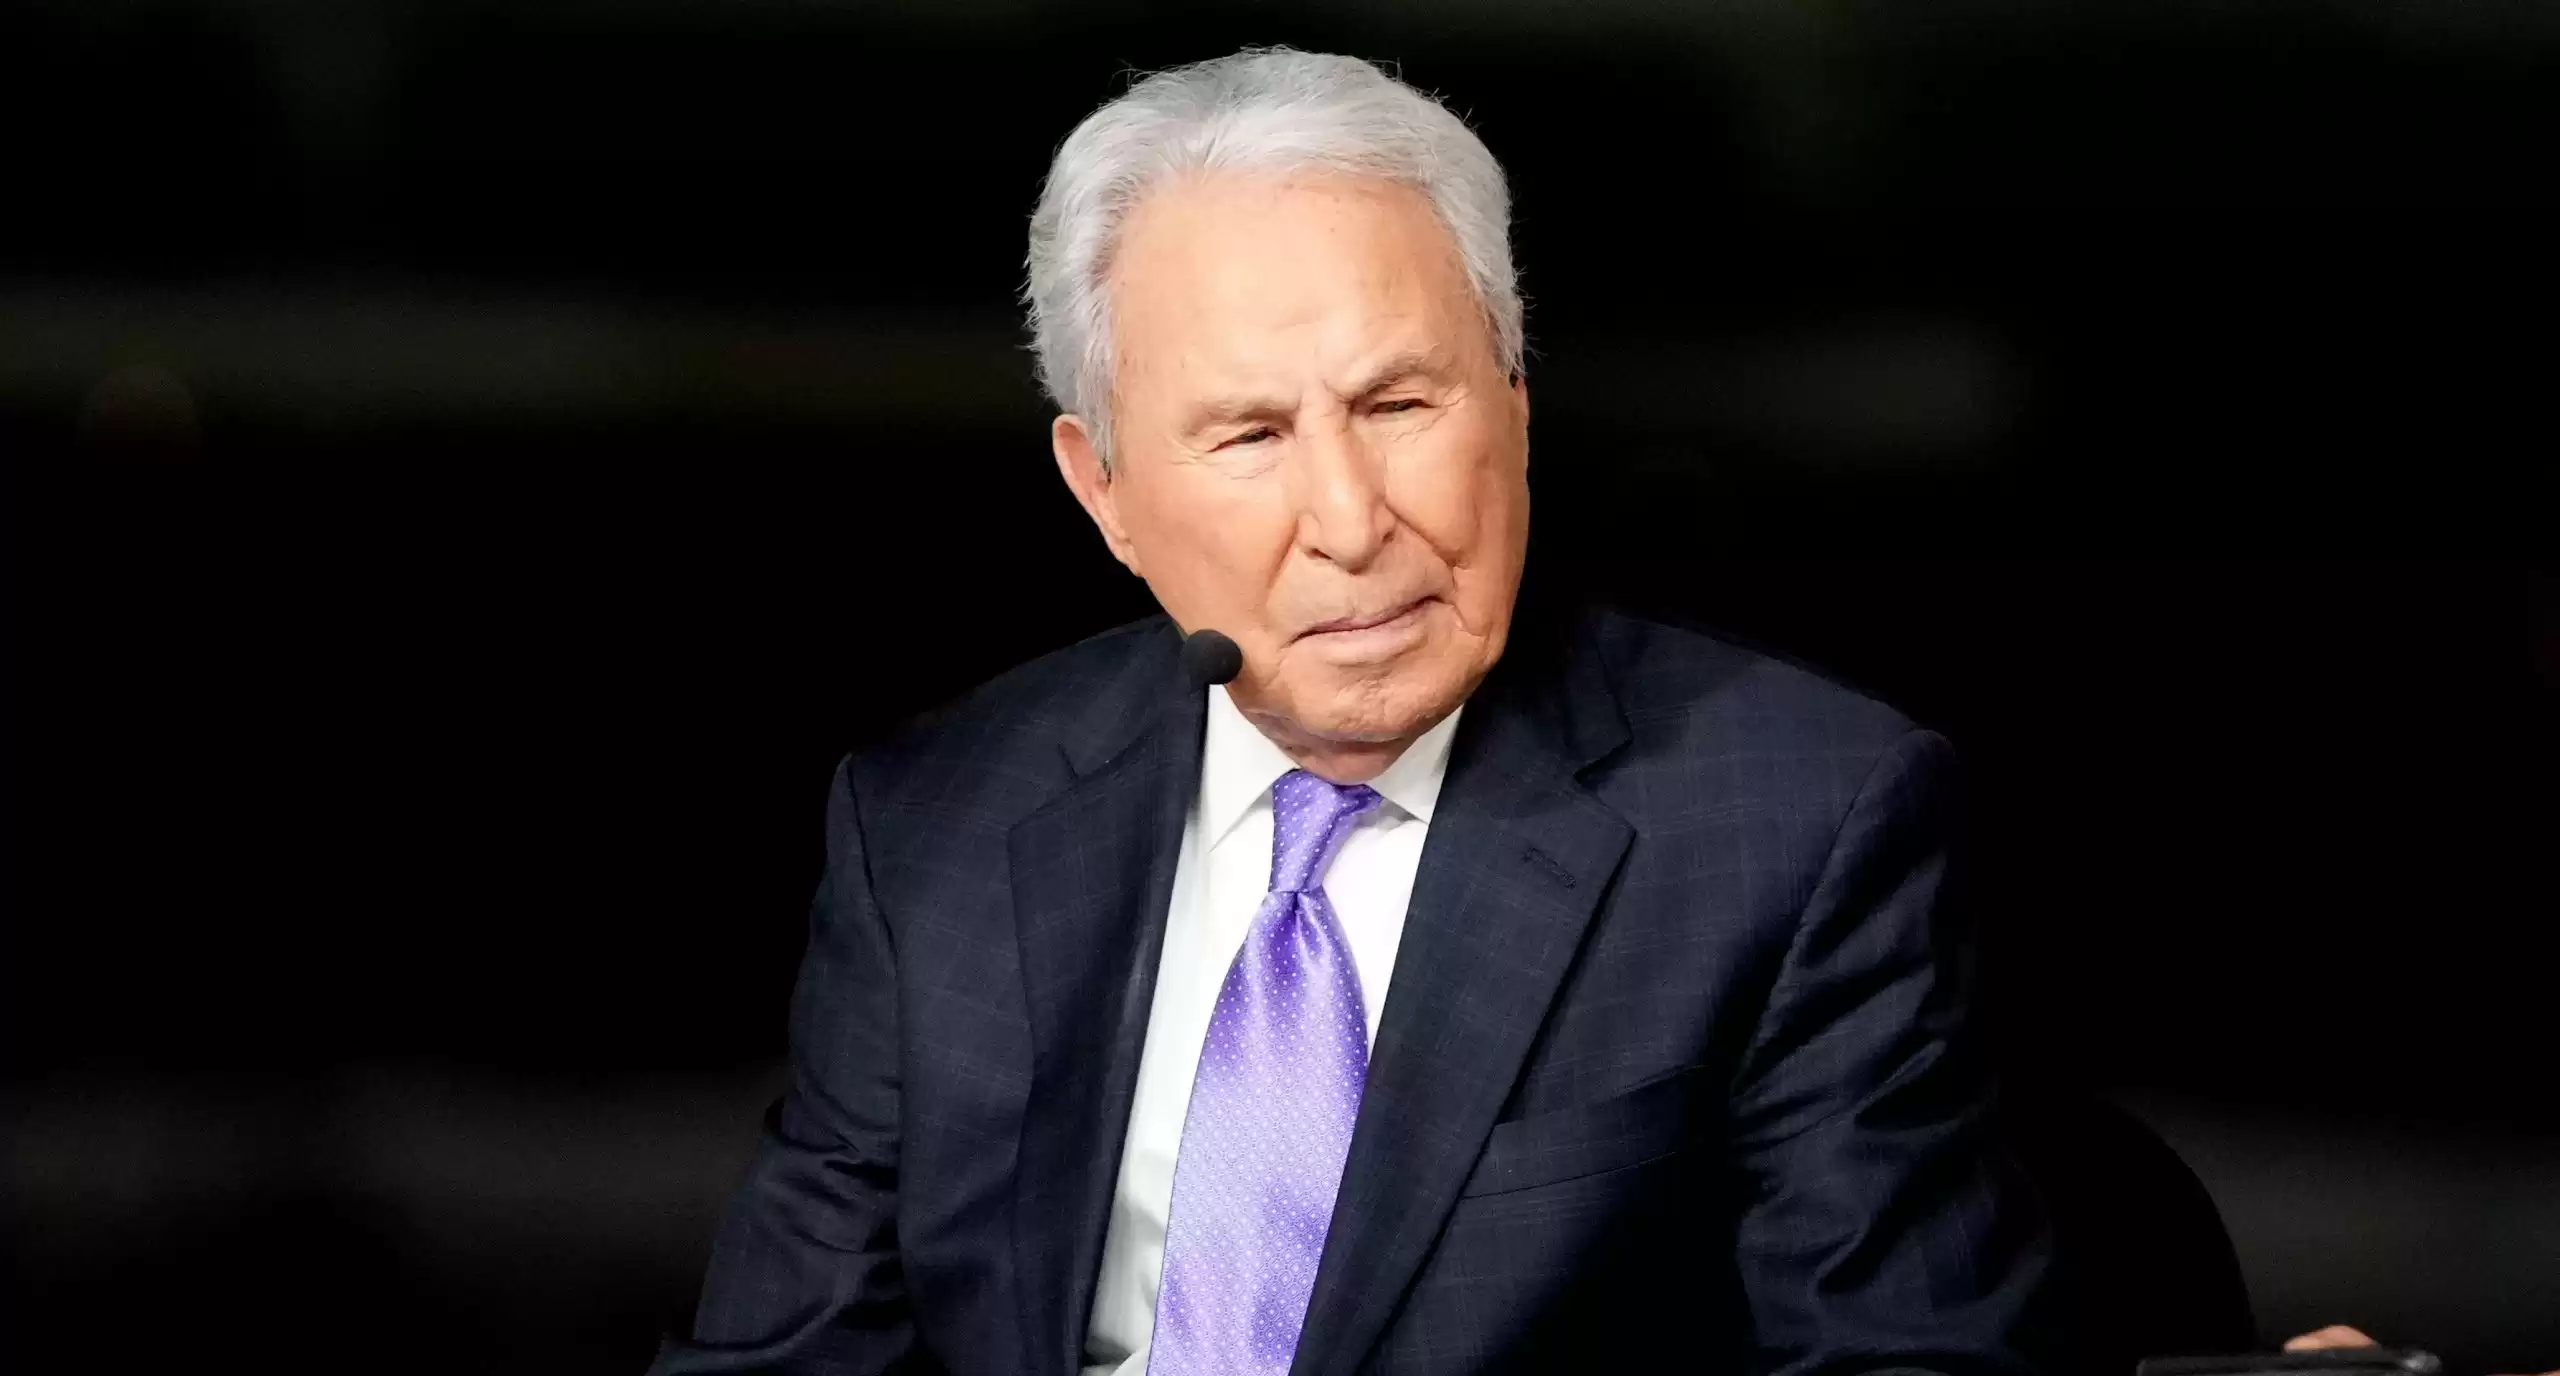 CFB World Reacts to Lee Corso News